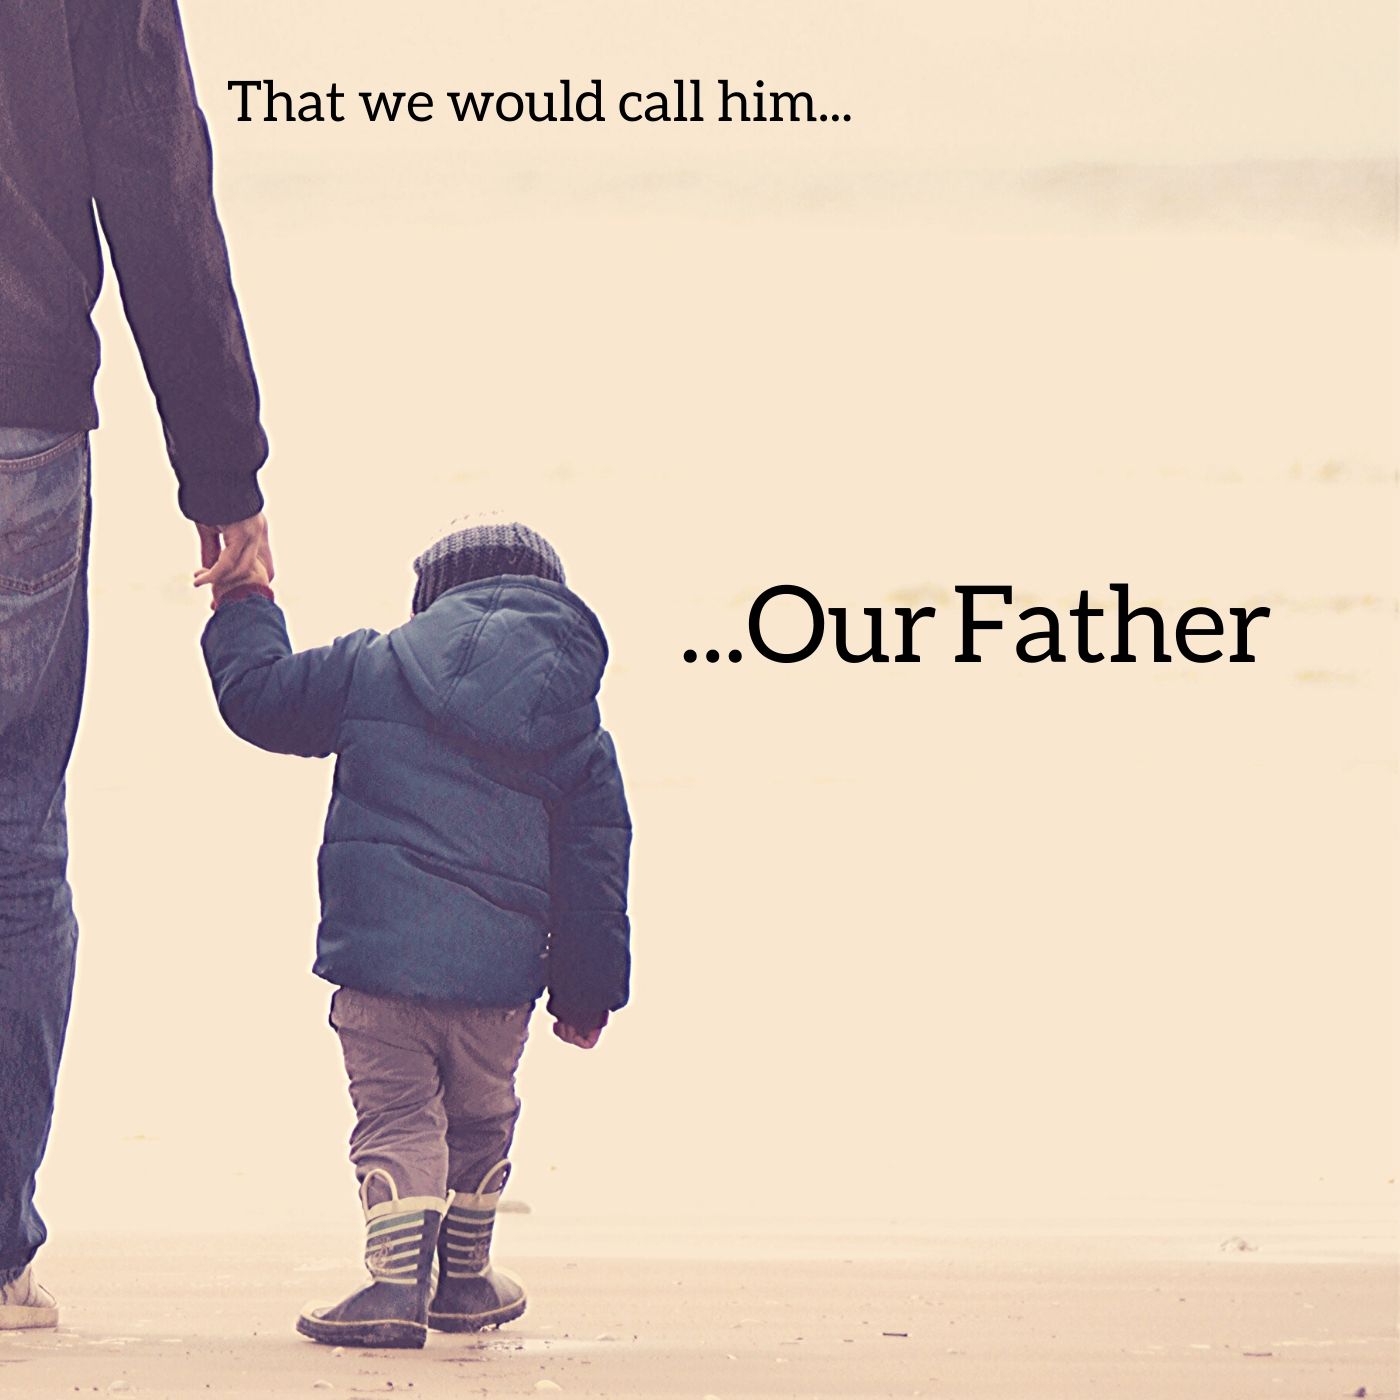 That we could call him…Our Father